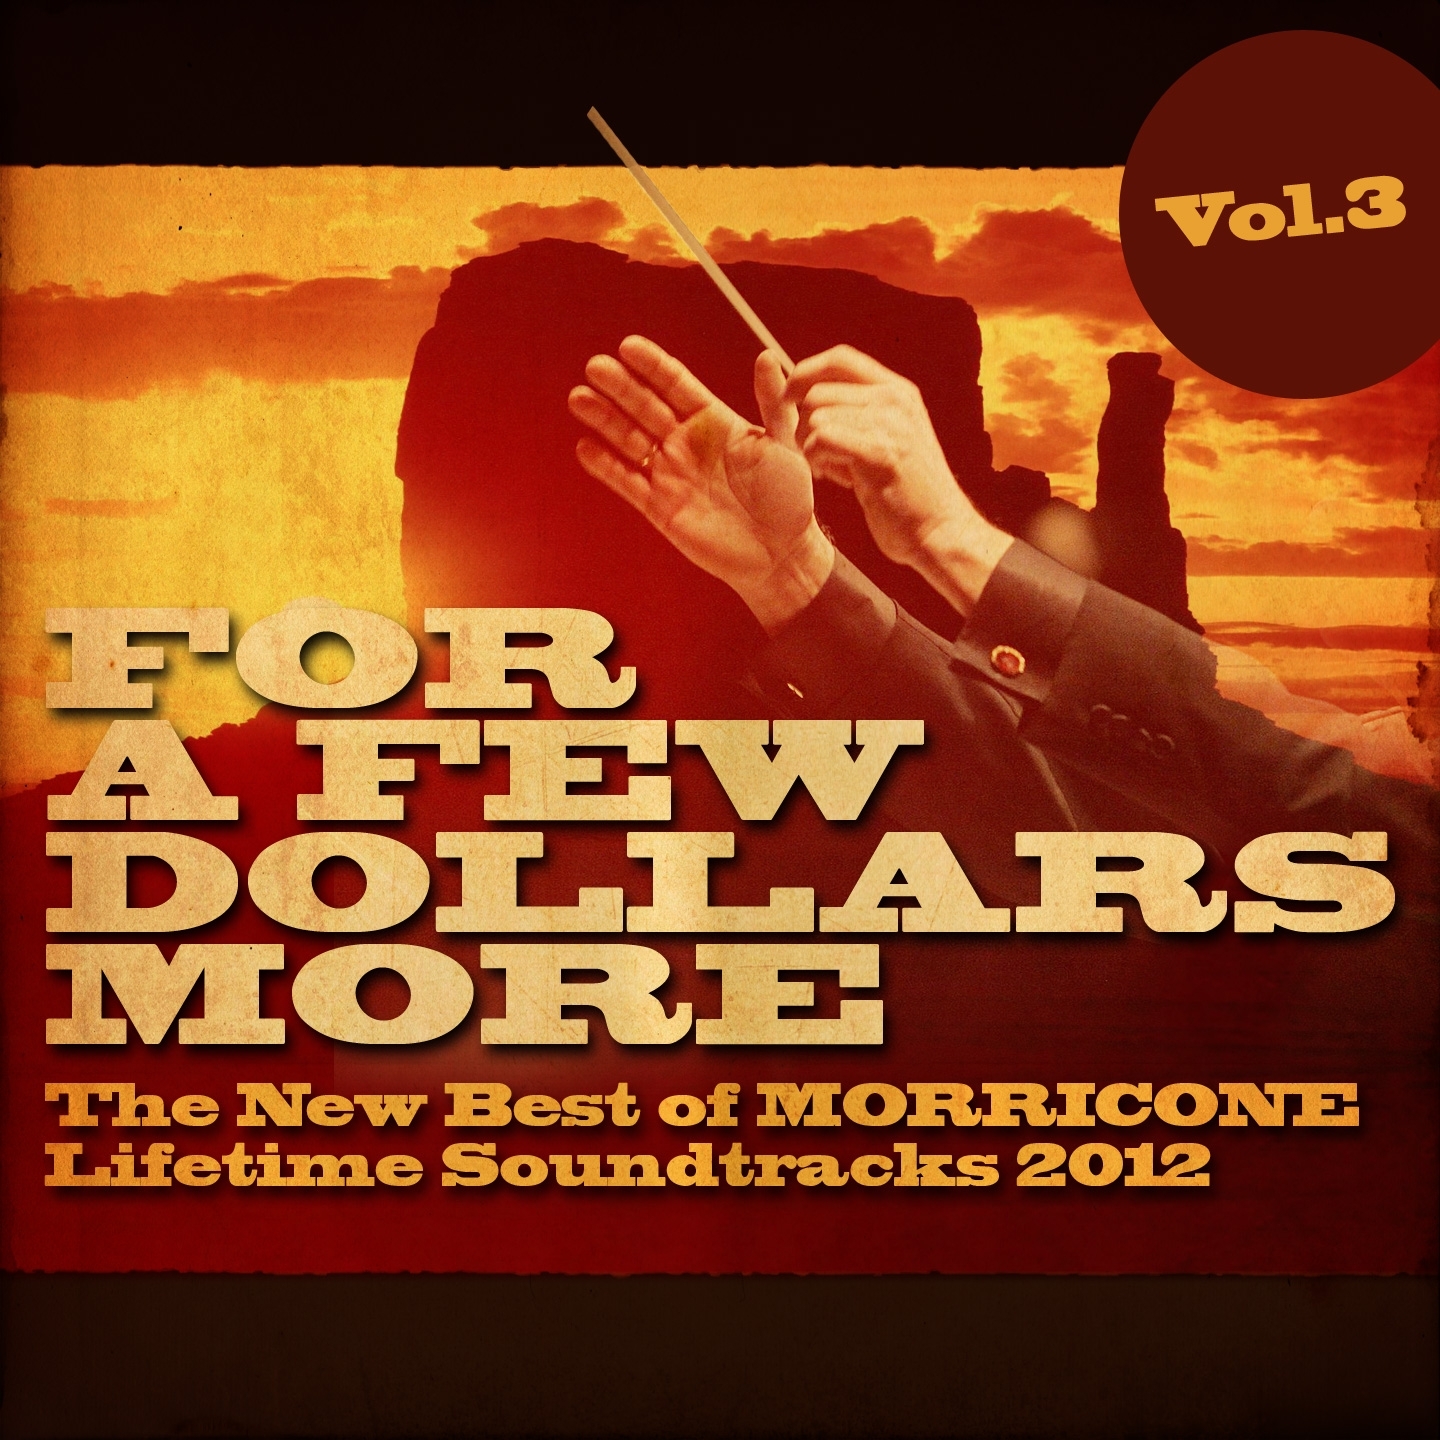 For a Few Dollars More, Vol. 3